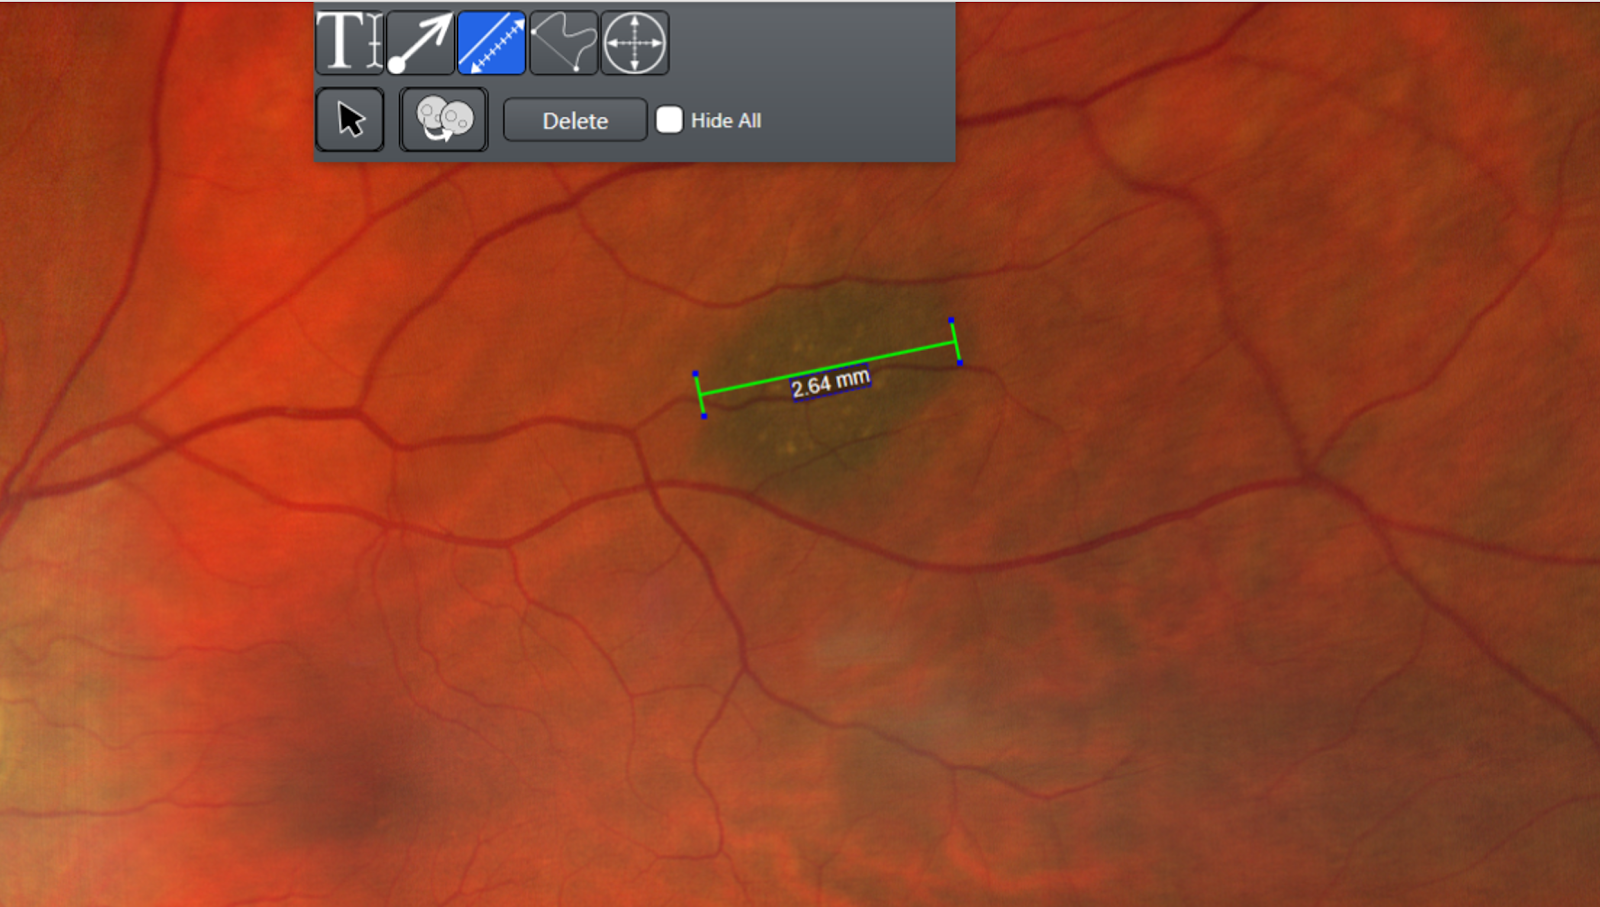 Allow for lesion measurement. Using the caliper function a measurement can be taken to determine the size of a retinal lesion. This patient’s choroidal nevus measured out to be 2.64 mm.